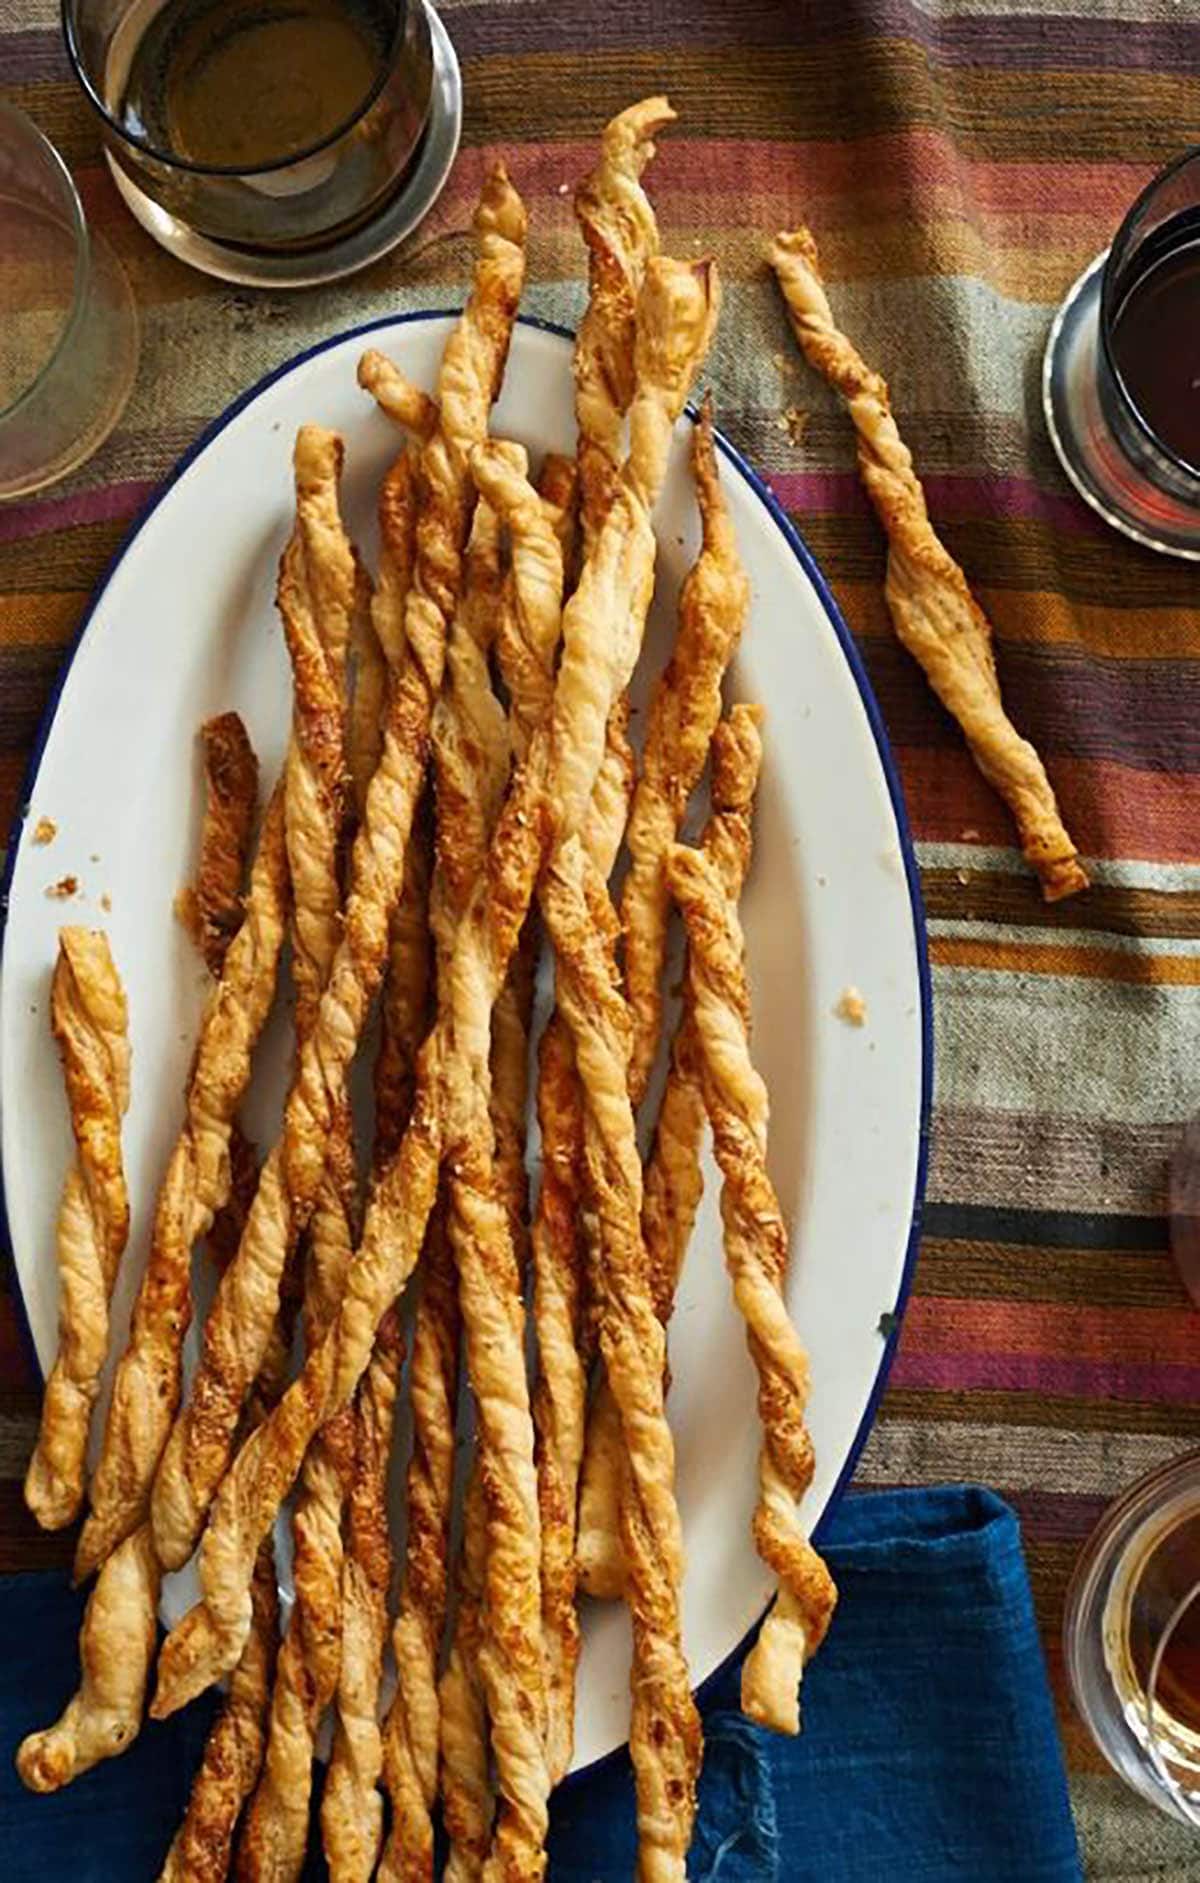 Homemade twisted Cheese Straws on a plate